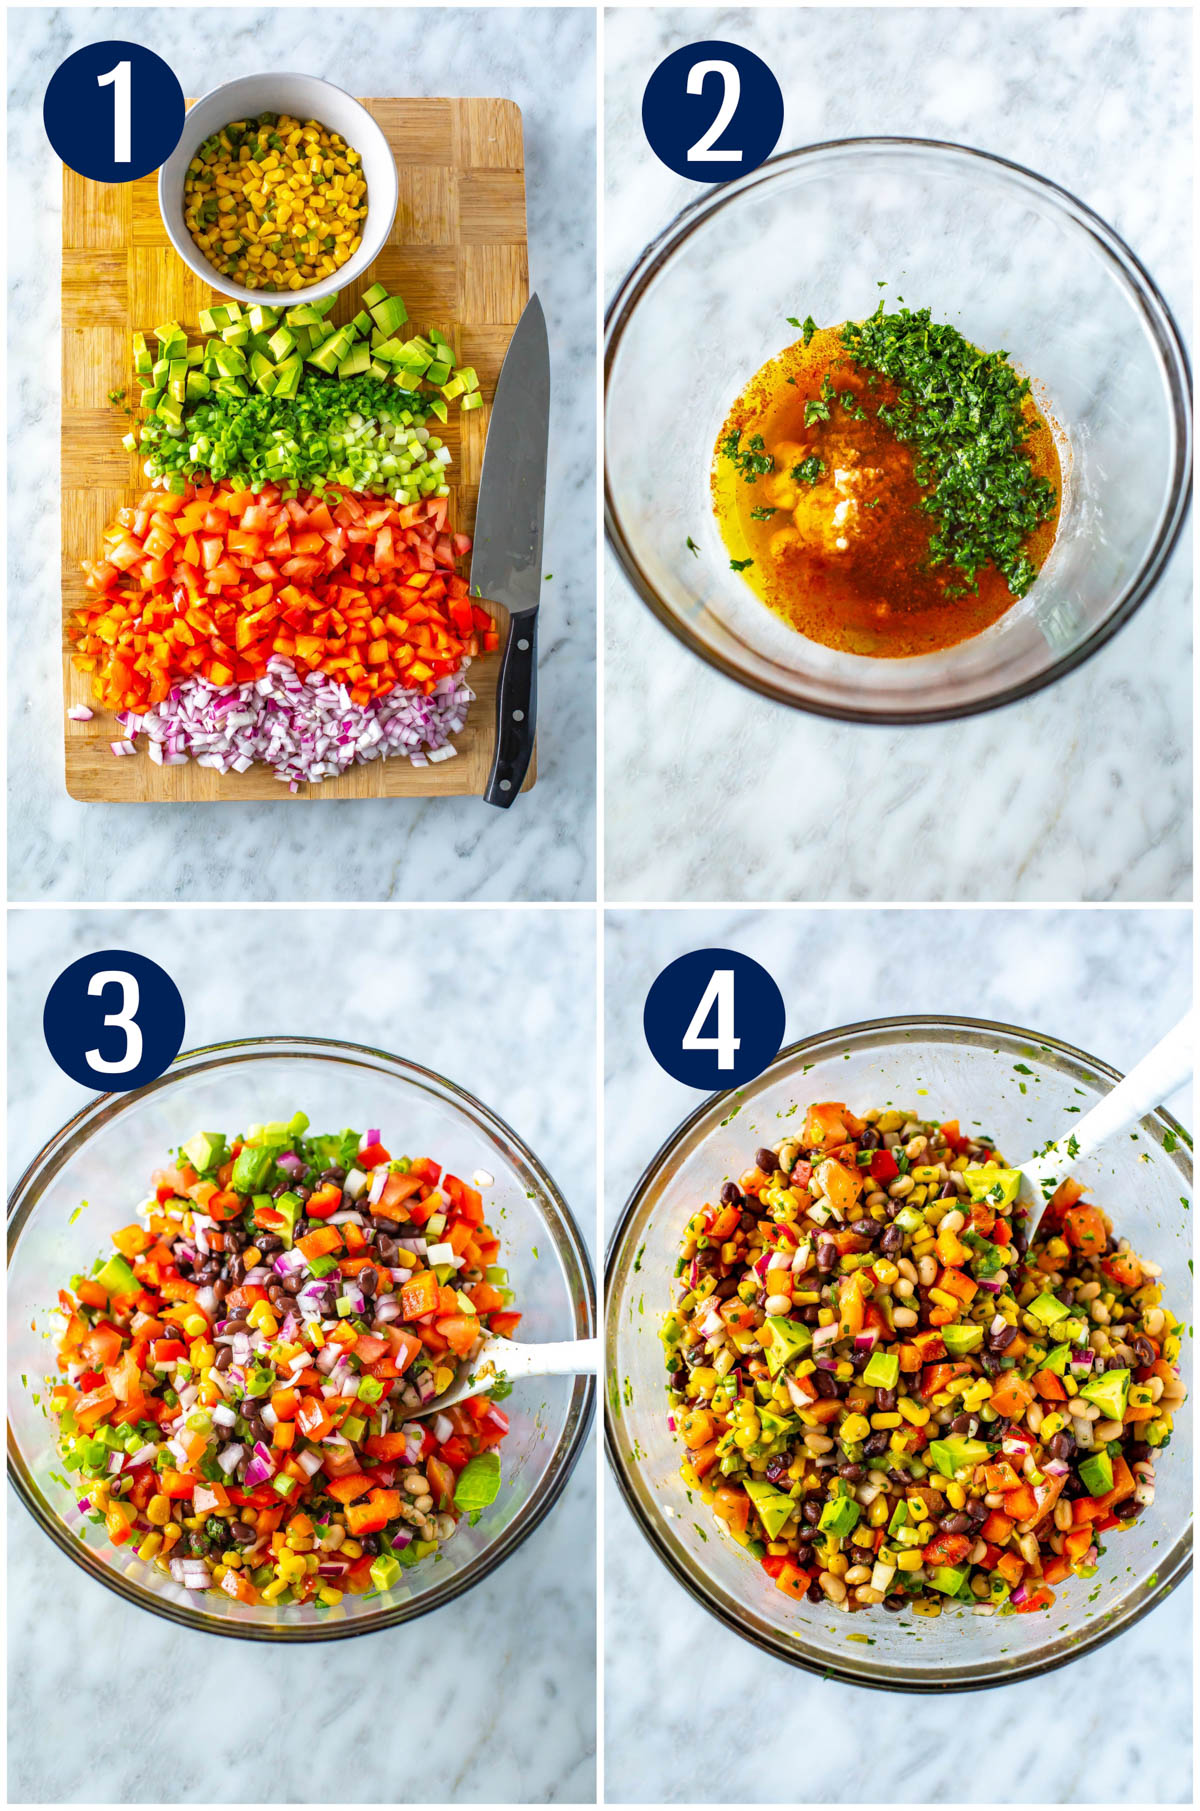 Step-by-step instructions collage for making cowboy caviar: chop veggies, make dressing, mix and let rest for 2 hours.